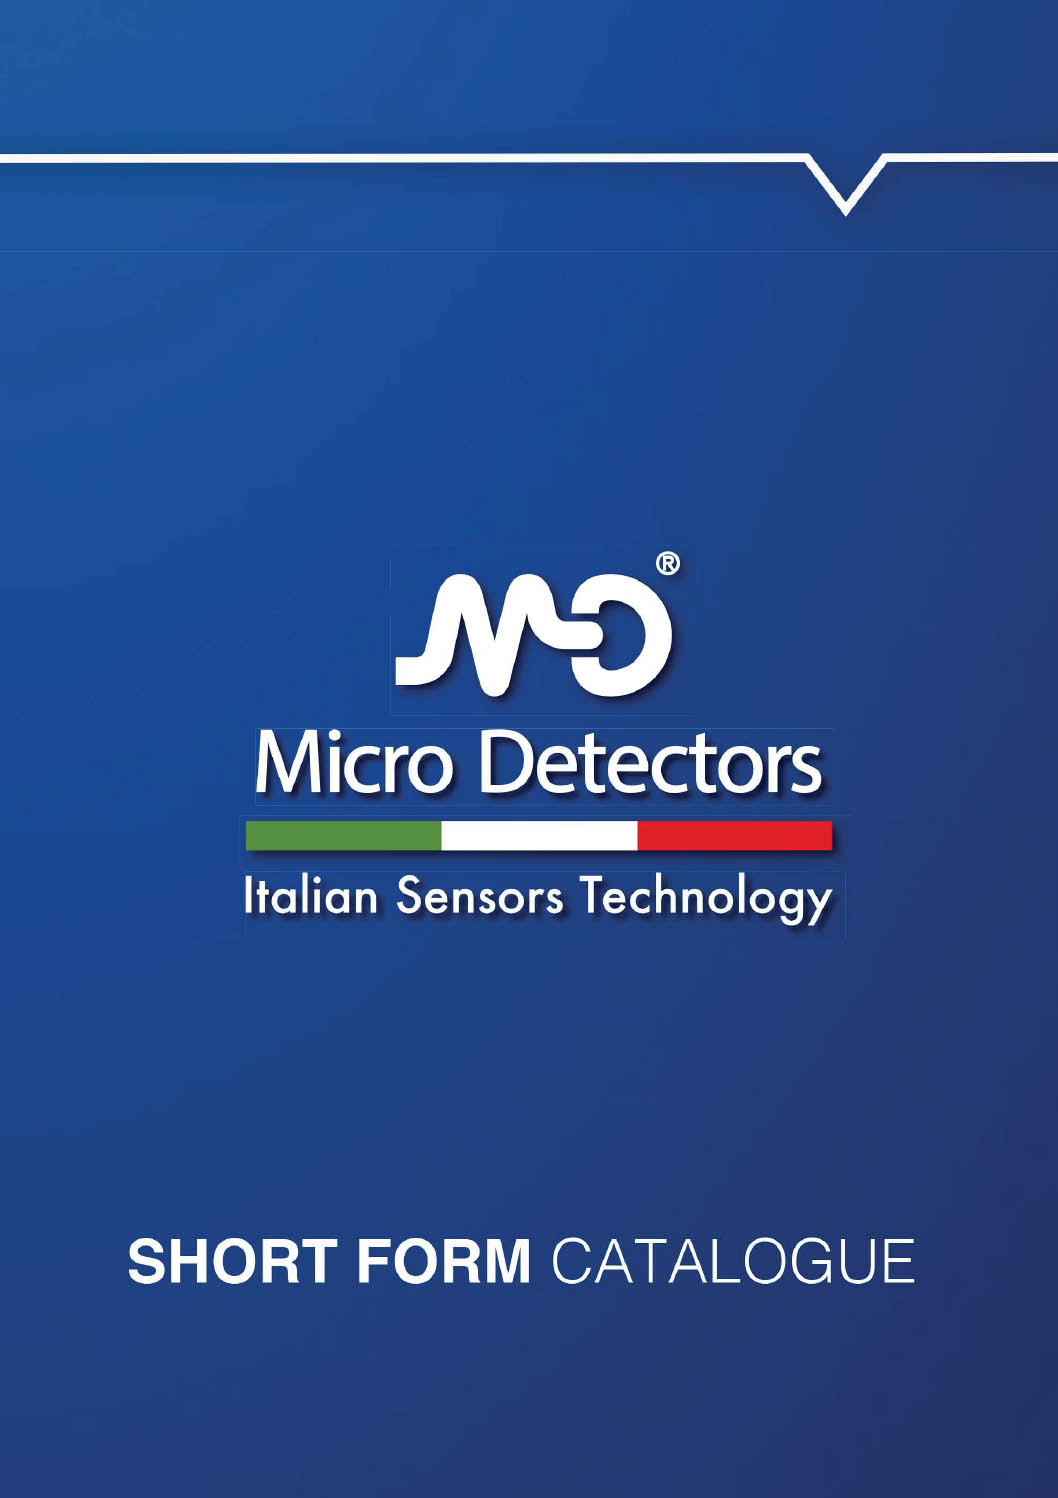 Micro Detectors Short Form Catalogue supplied by ElectroMechanica